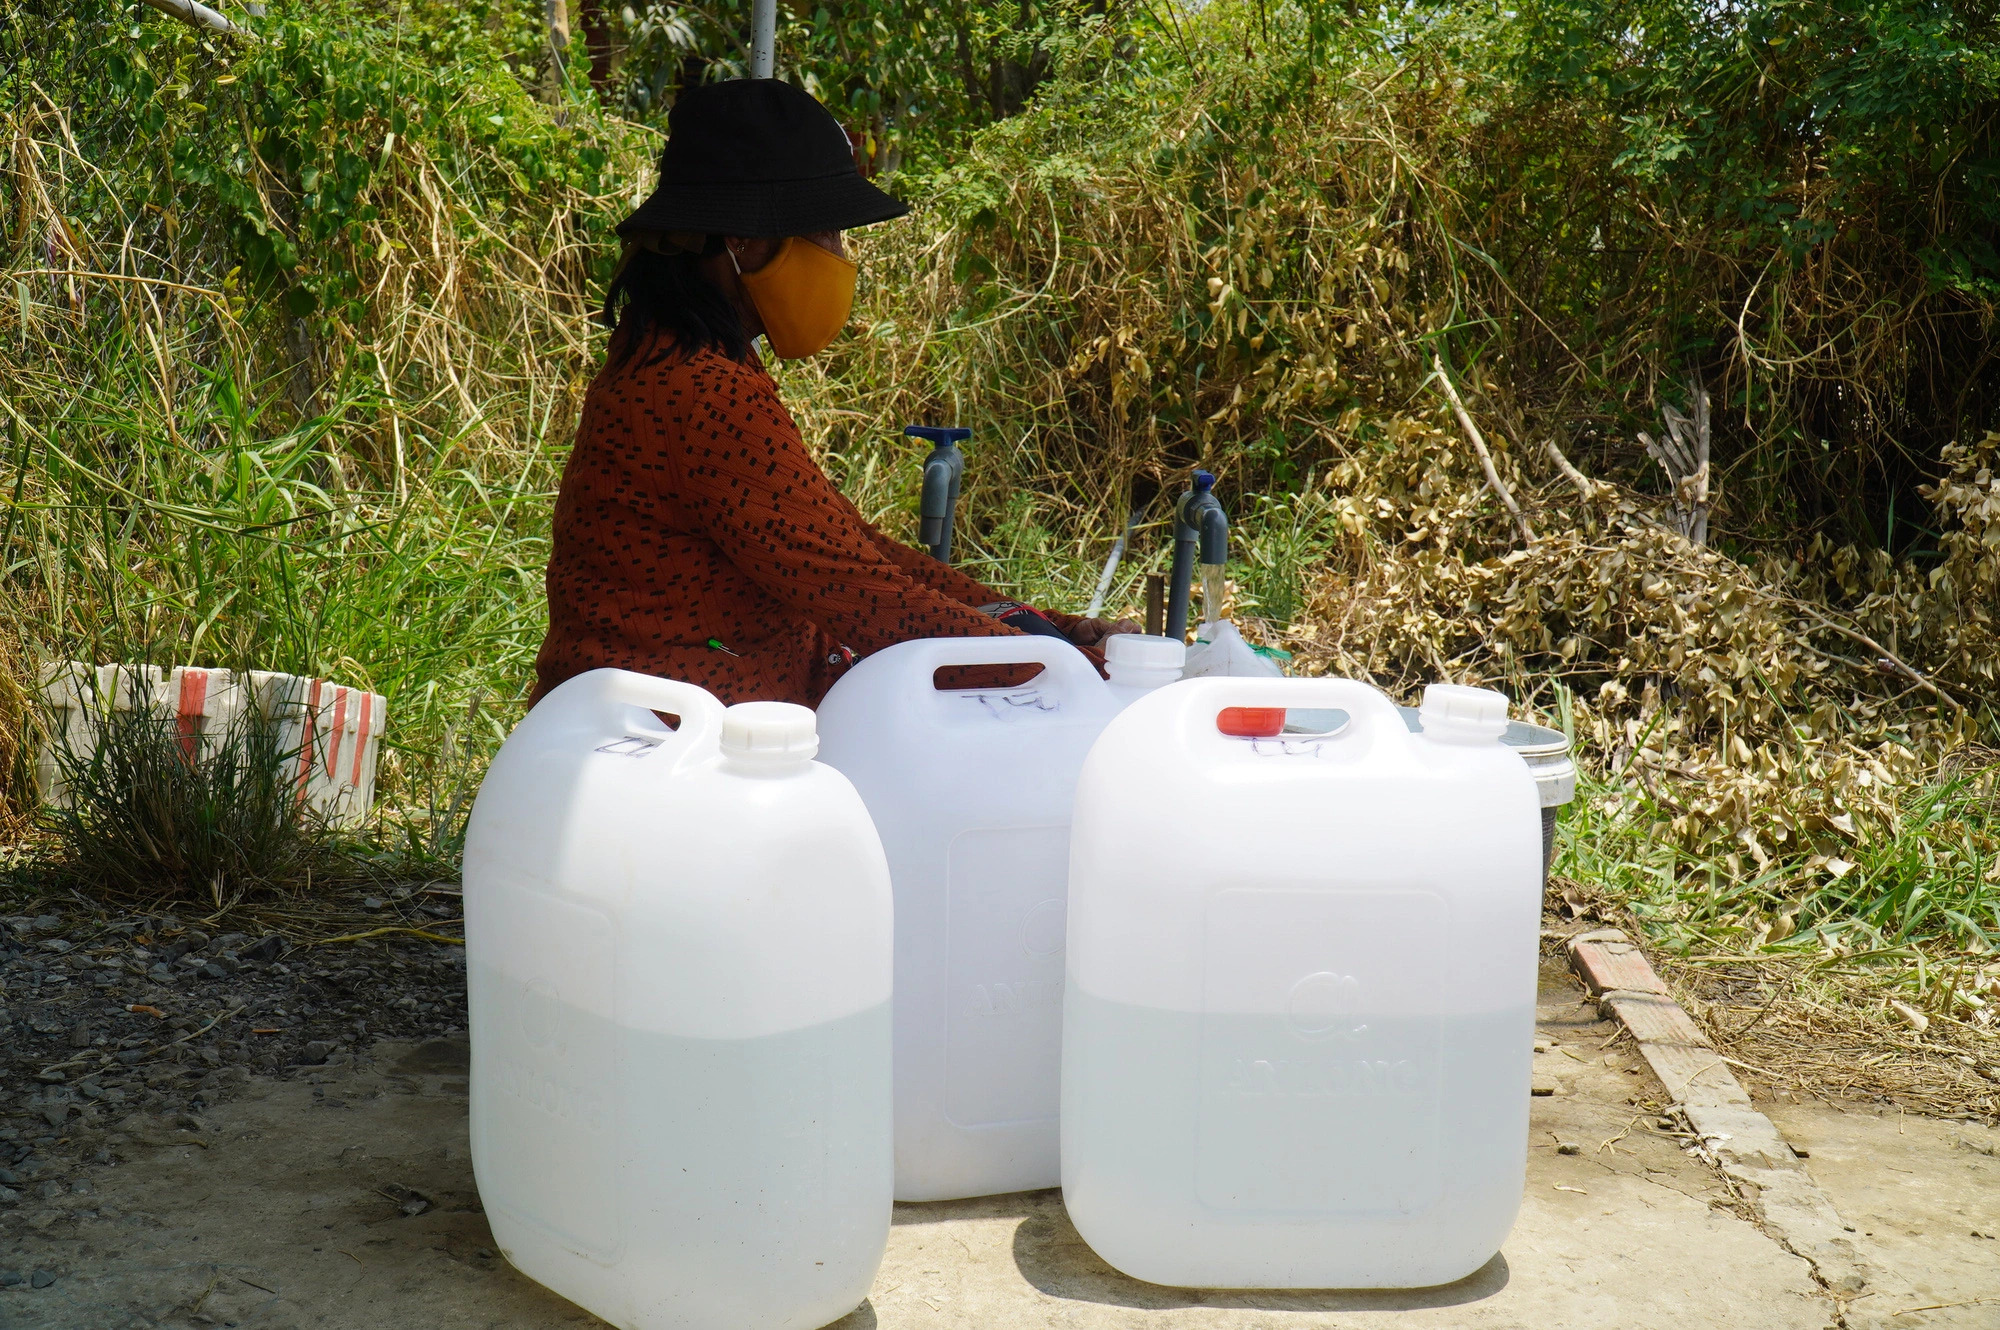 Such plastic cans of fresh water mean a lot to residents affected by saline intrusion in Tien Giang Province, southern Vietnam. Photo: Mau Truong / Tuoi Tre